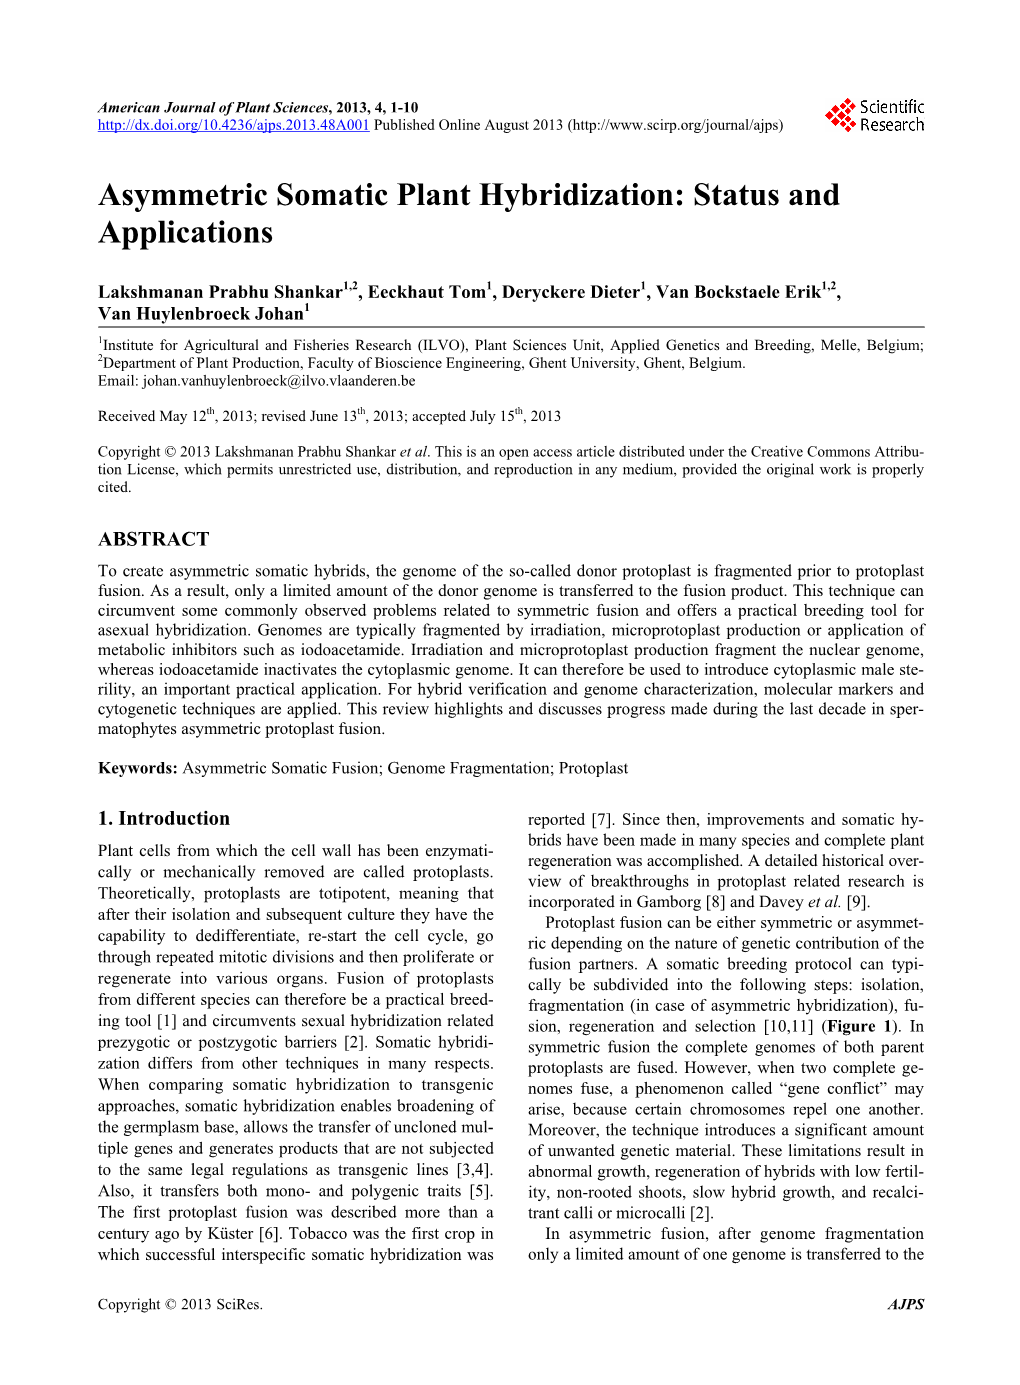 Asymmetric Somatic Plant Hybridization: Status and Applications